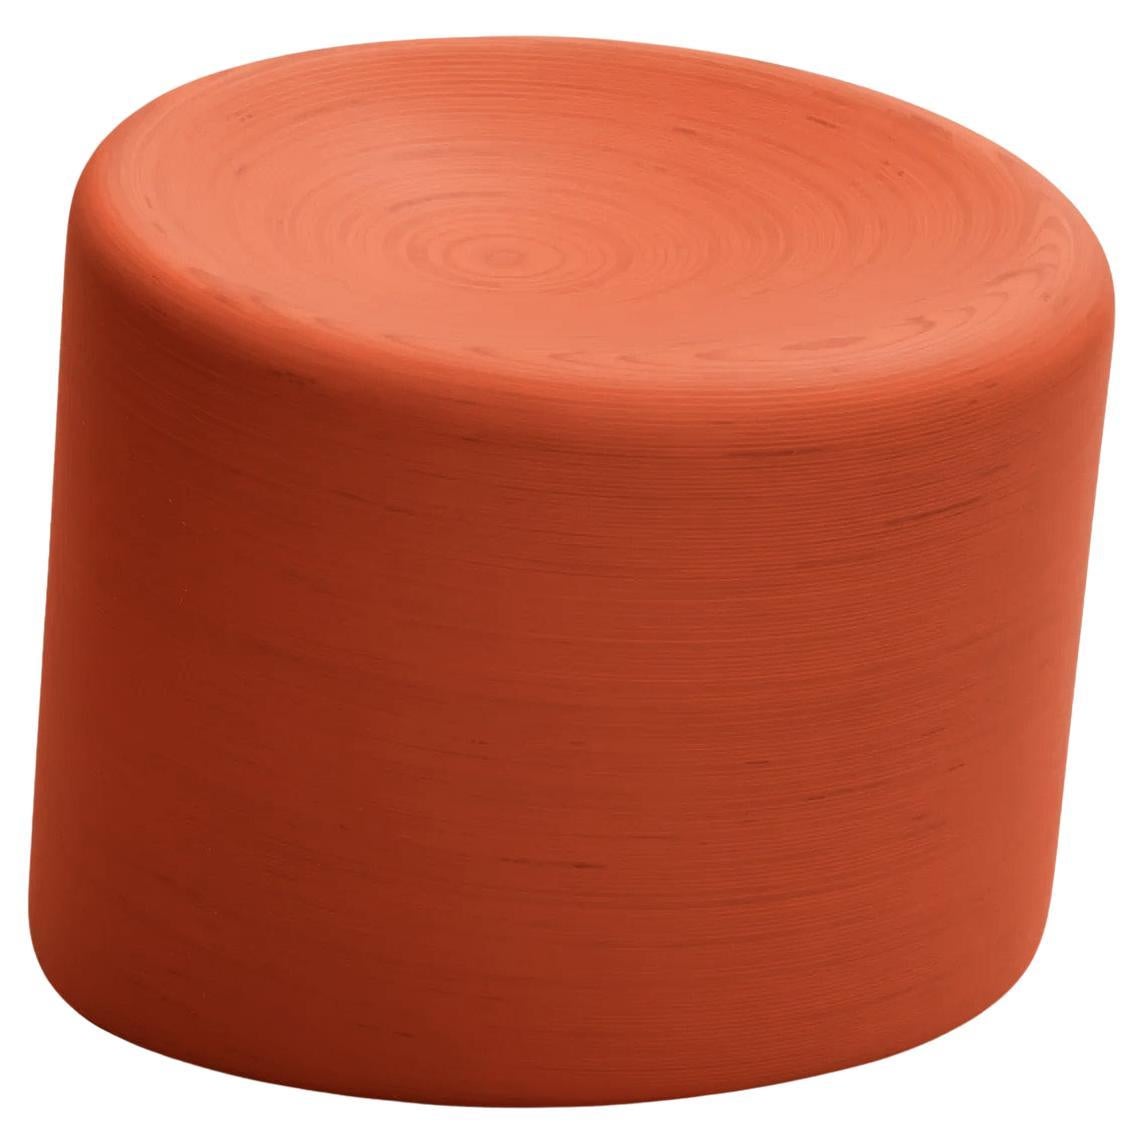 Stack Seat in Coral, Timbur, Represented by Tuleste Factory For Sale